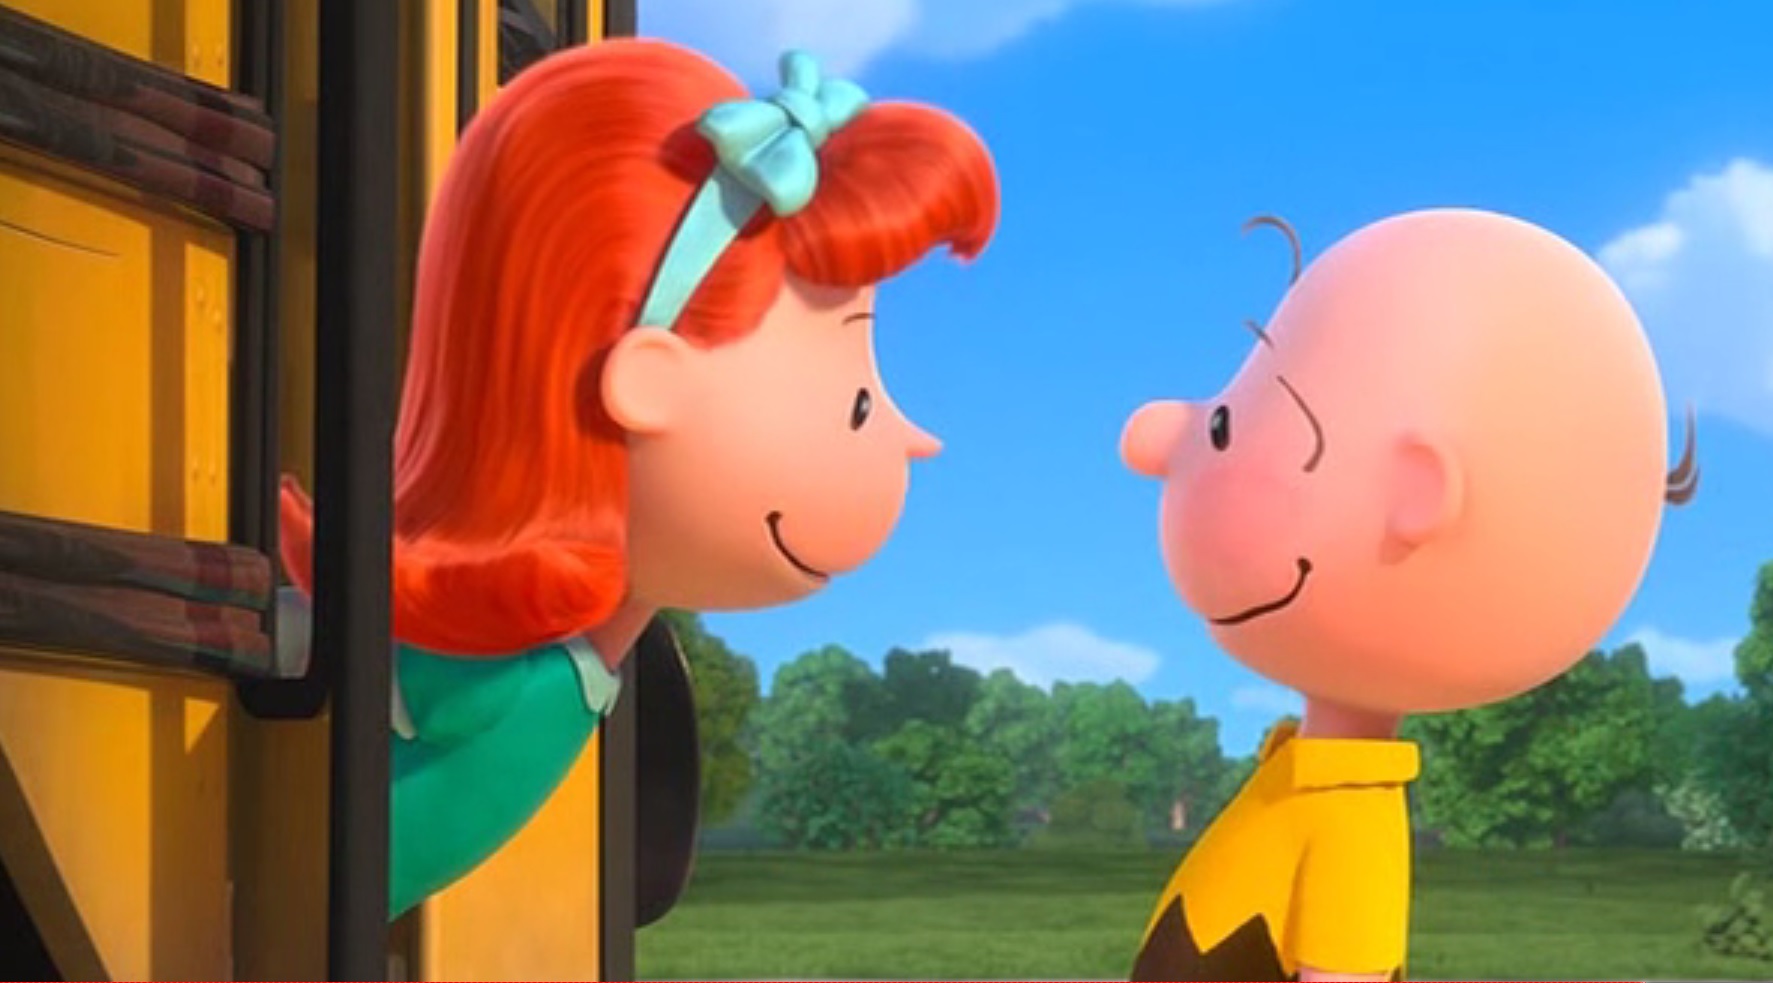 Image The Little Red Haired Girljpg Charlie Brown And Snoopy